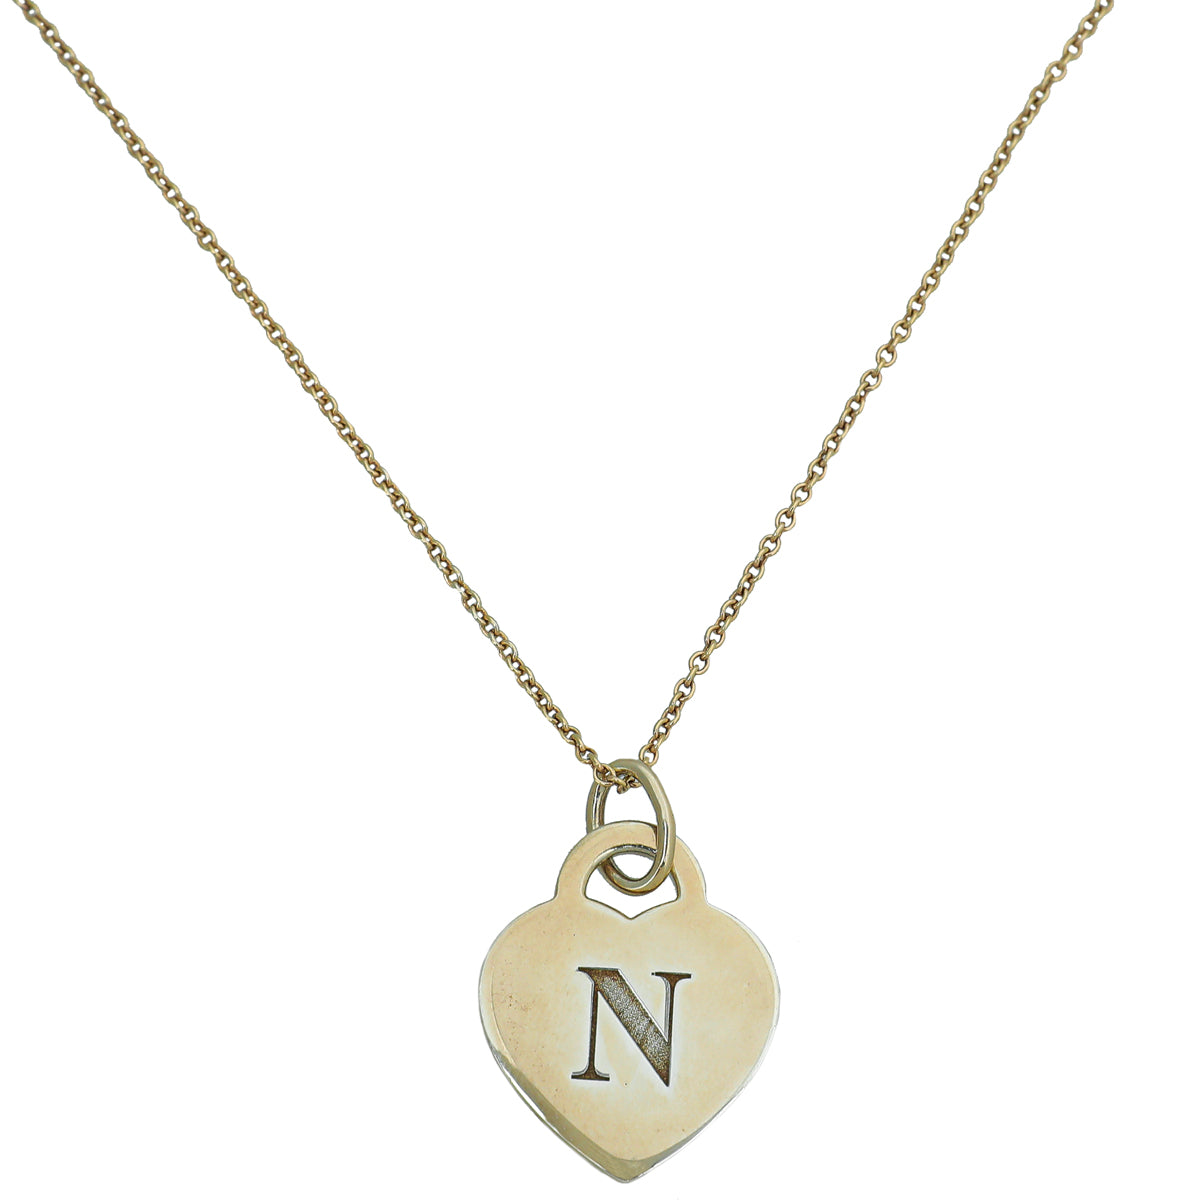 Tiffany & Co Silver Gold Plated Heart Tag "N" Letter Pendant Necklace